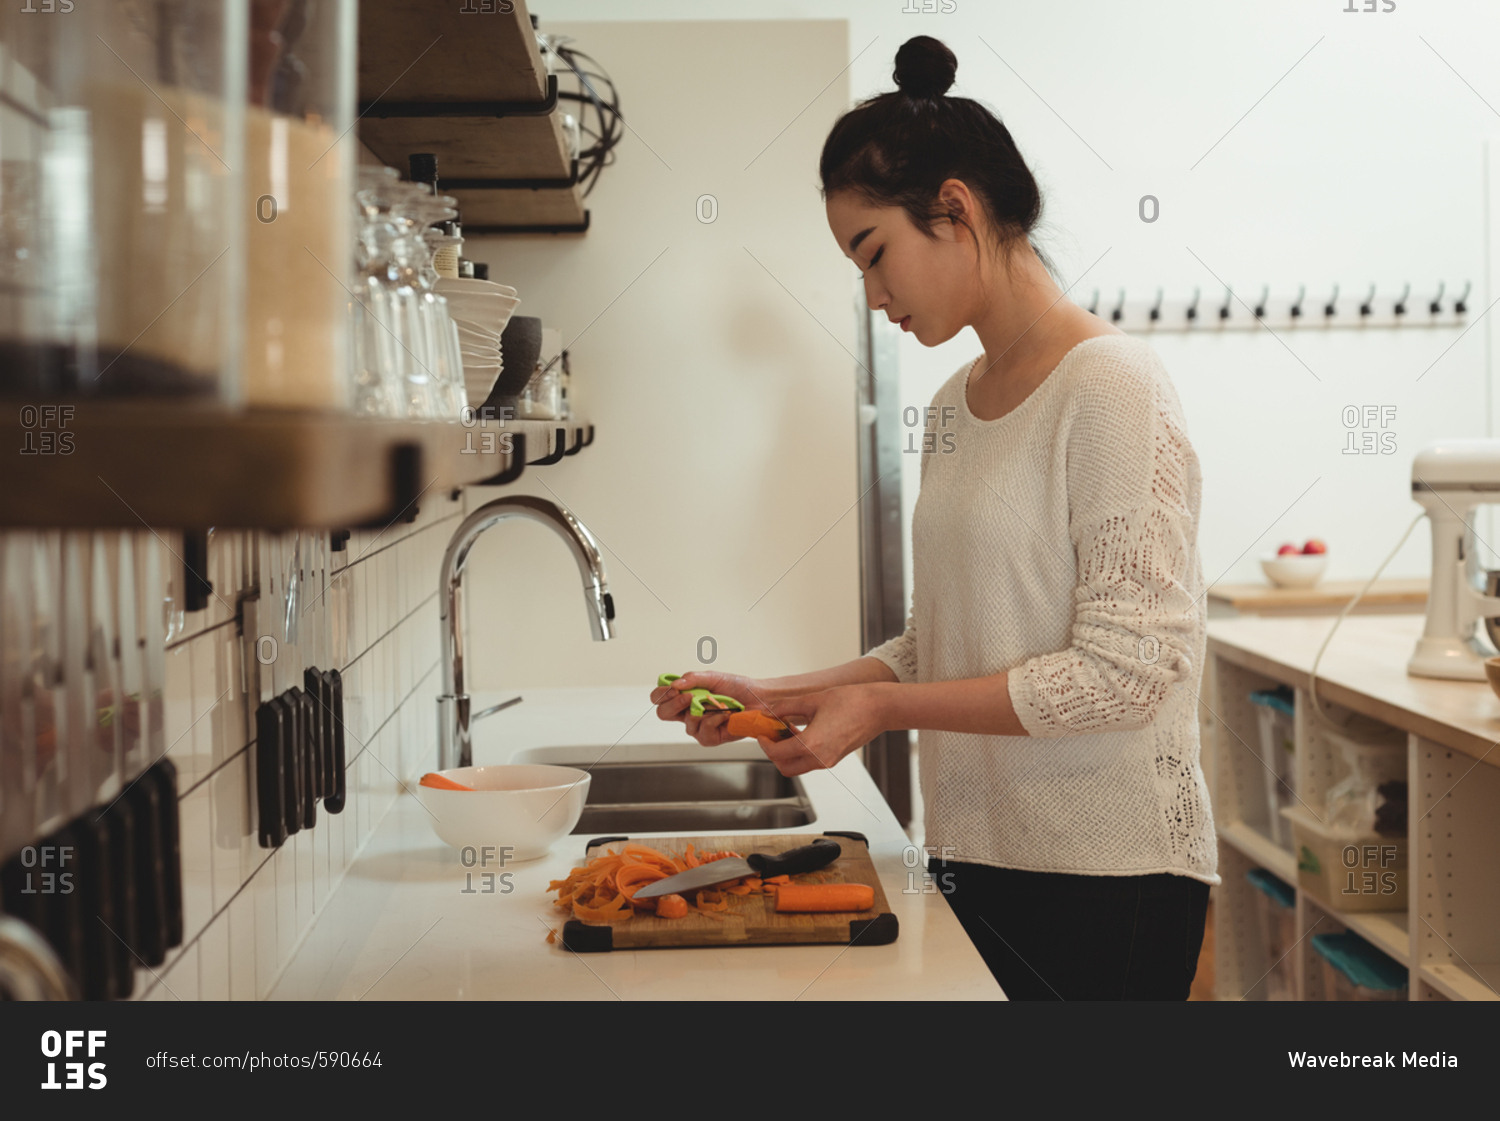 Beautiful woman peeling vegetables in kitchen sink at home